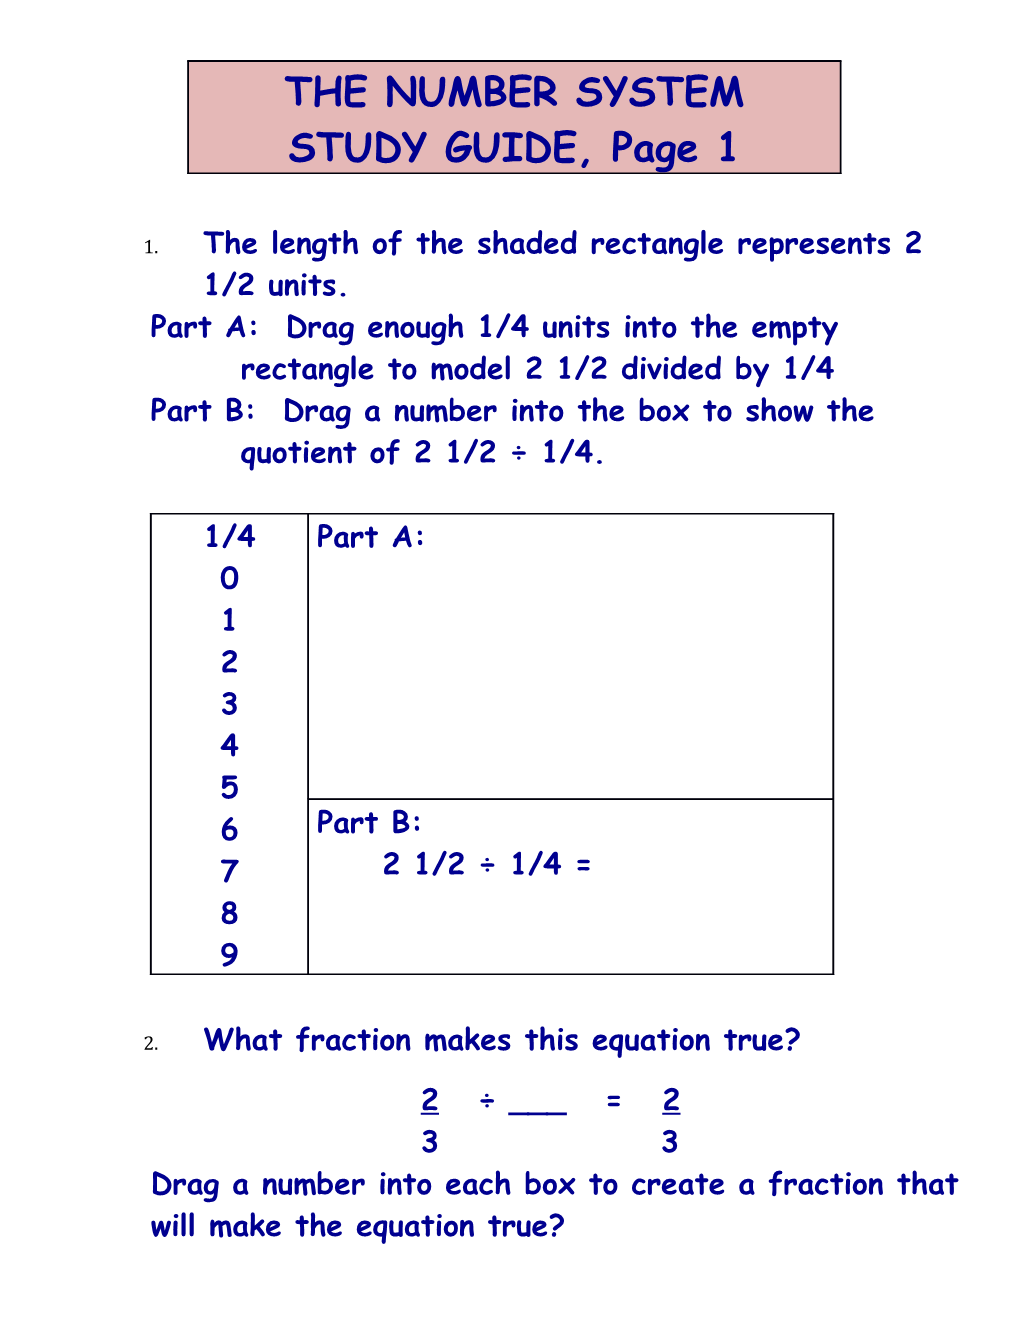 Part A: Drag Enough 1/4 Units Into the Empty Rectangle to Model 2 1/2 Divided by 1/4